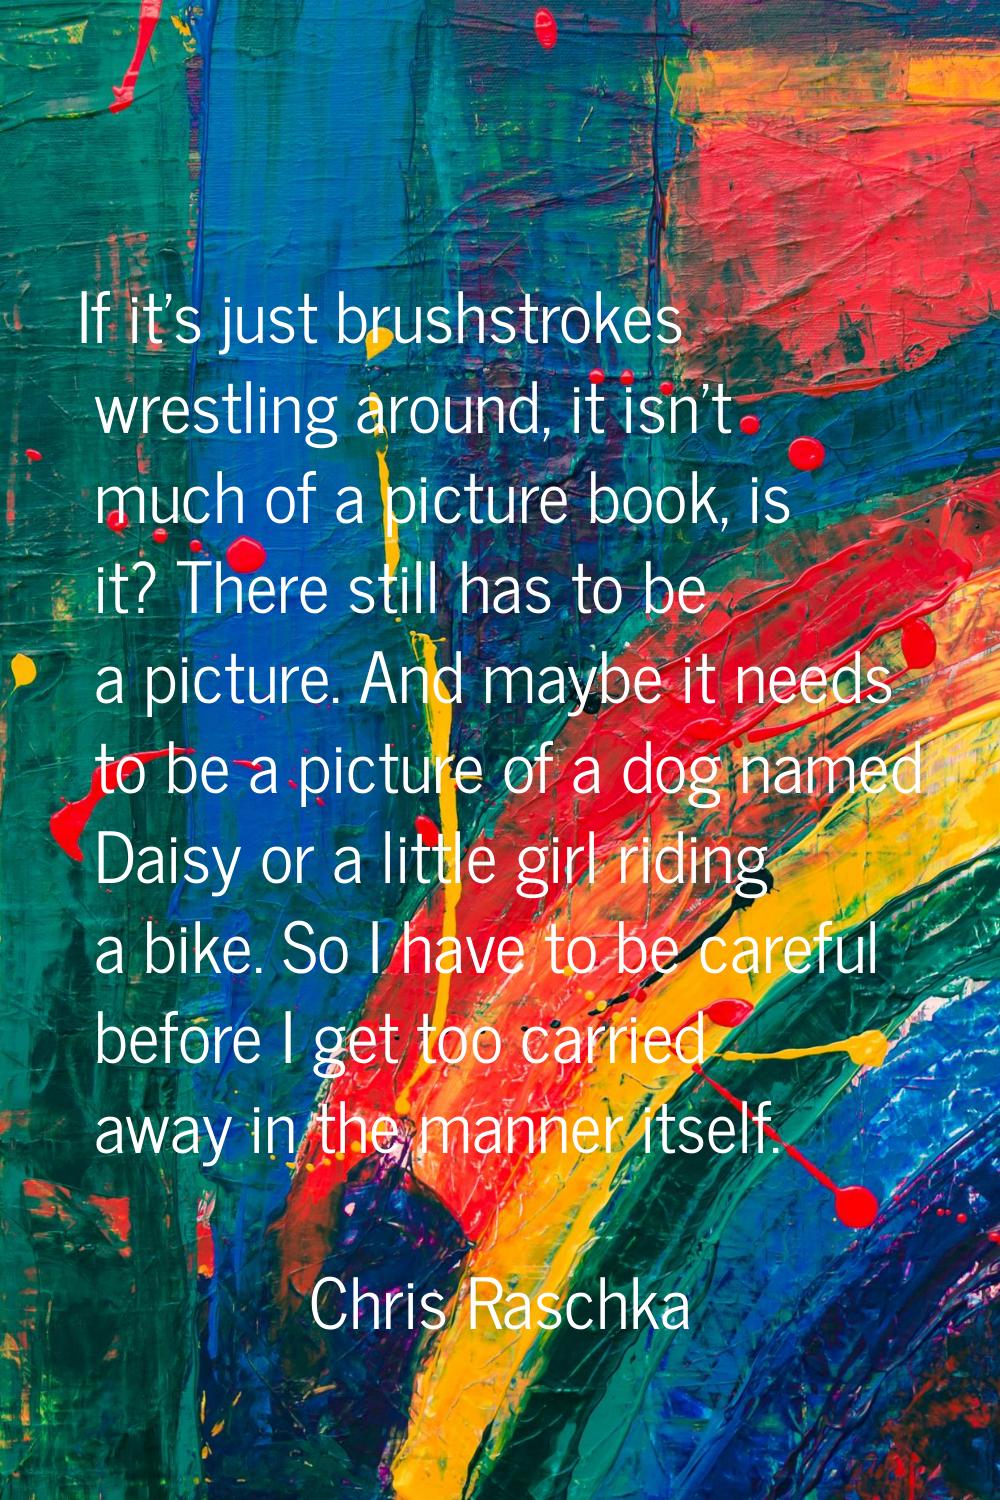 If it's just brushstrokes wrestling around, it isn't much of a picture book, is it? There still has